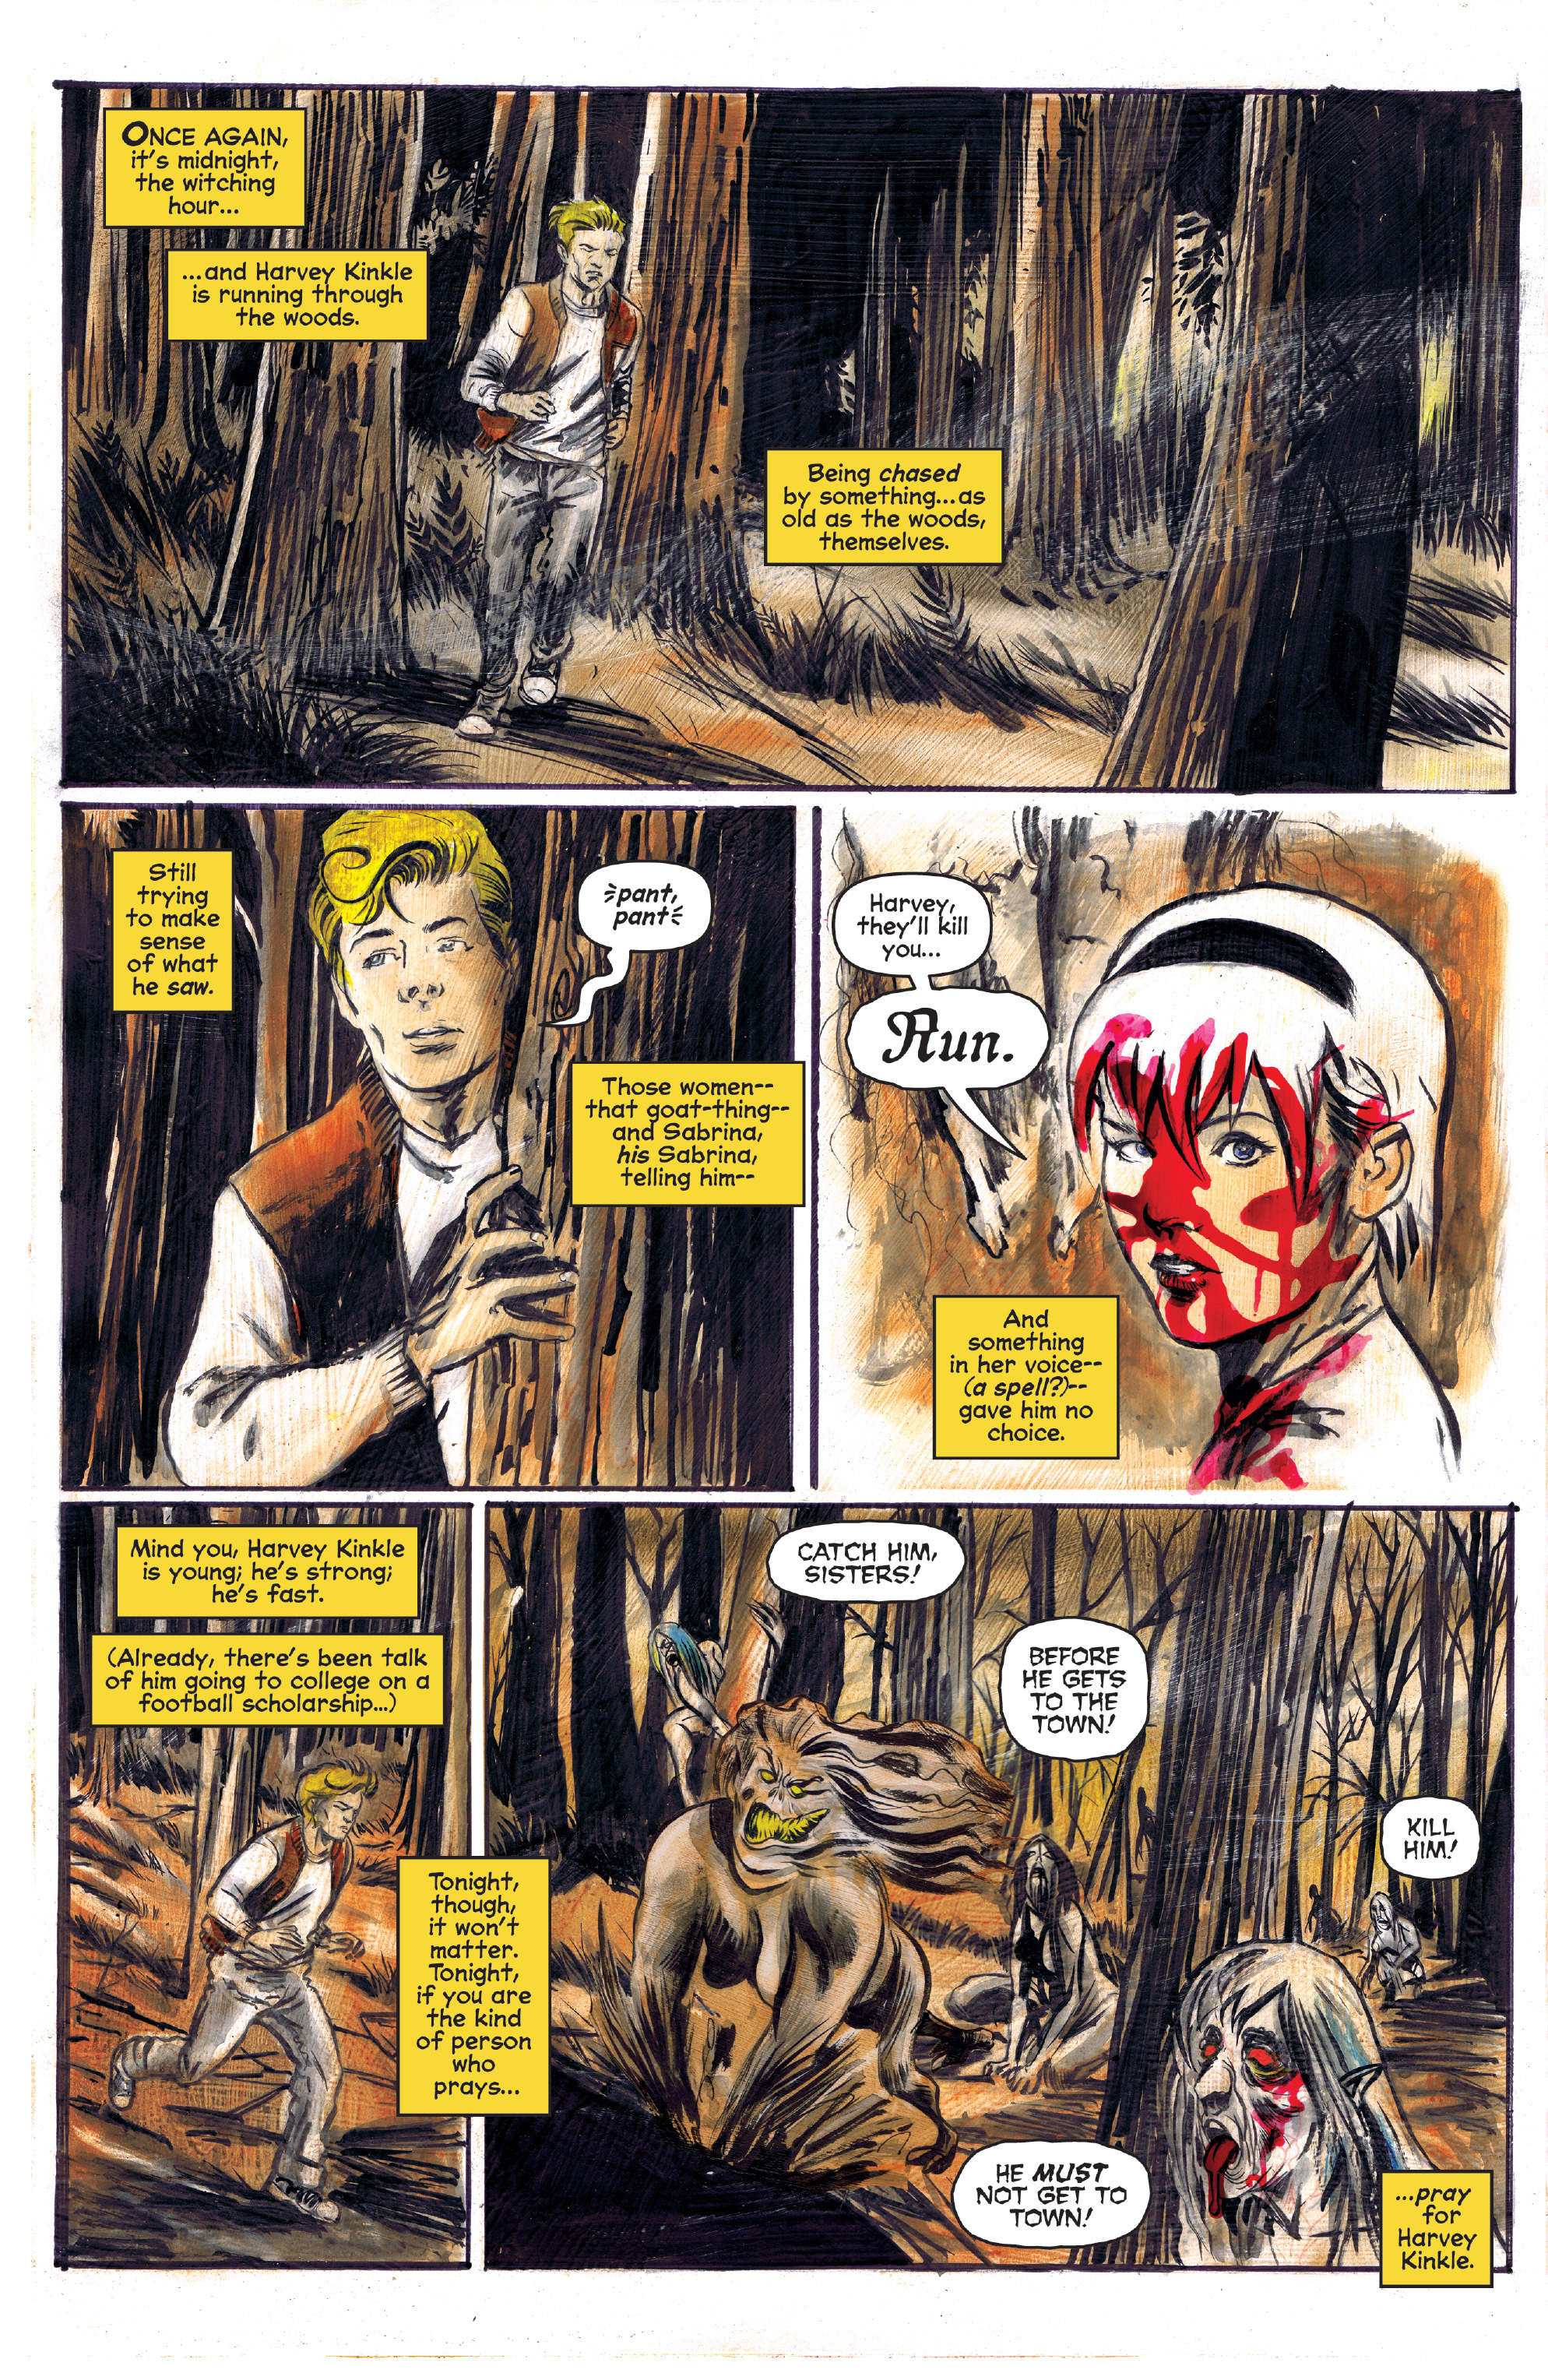 Chilling Adventures of Sabrina  (2014-): Chapter 4 - Page 3